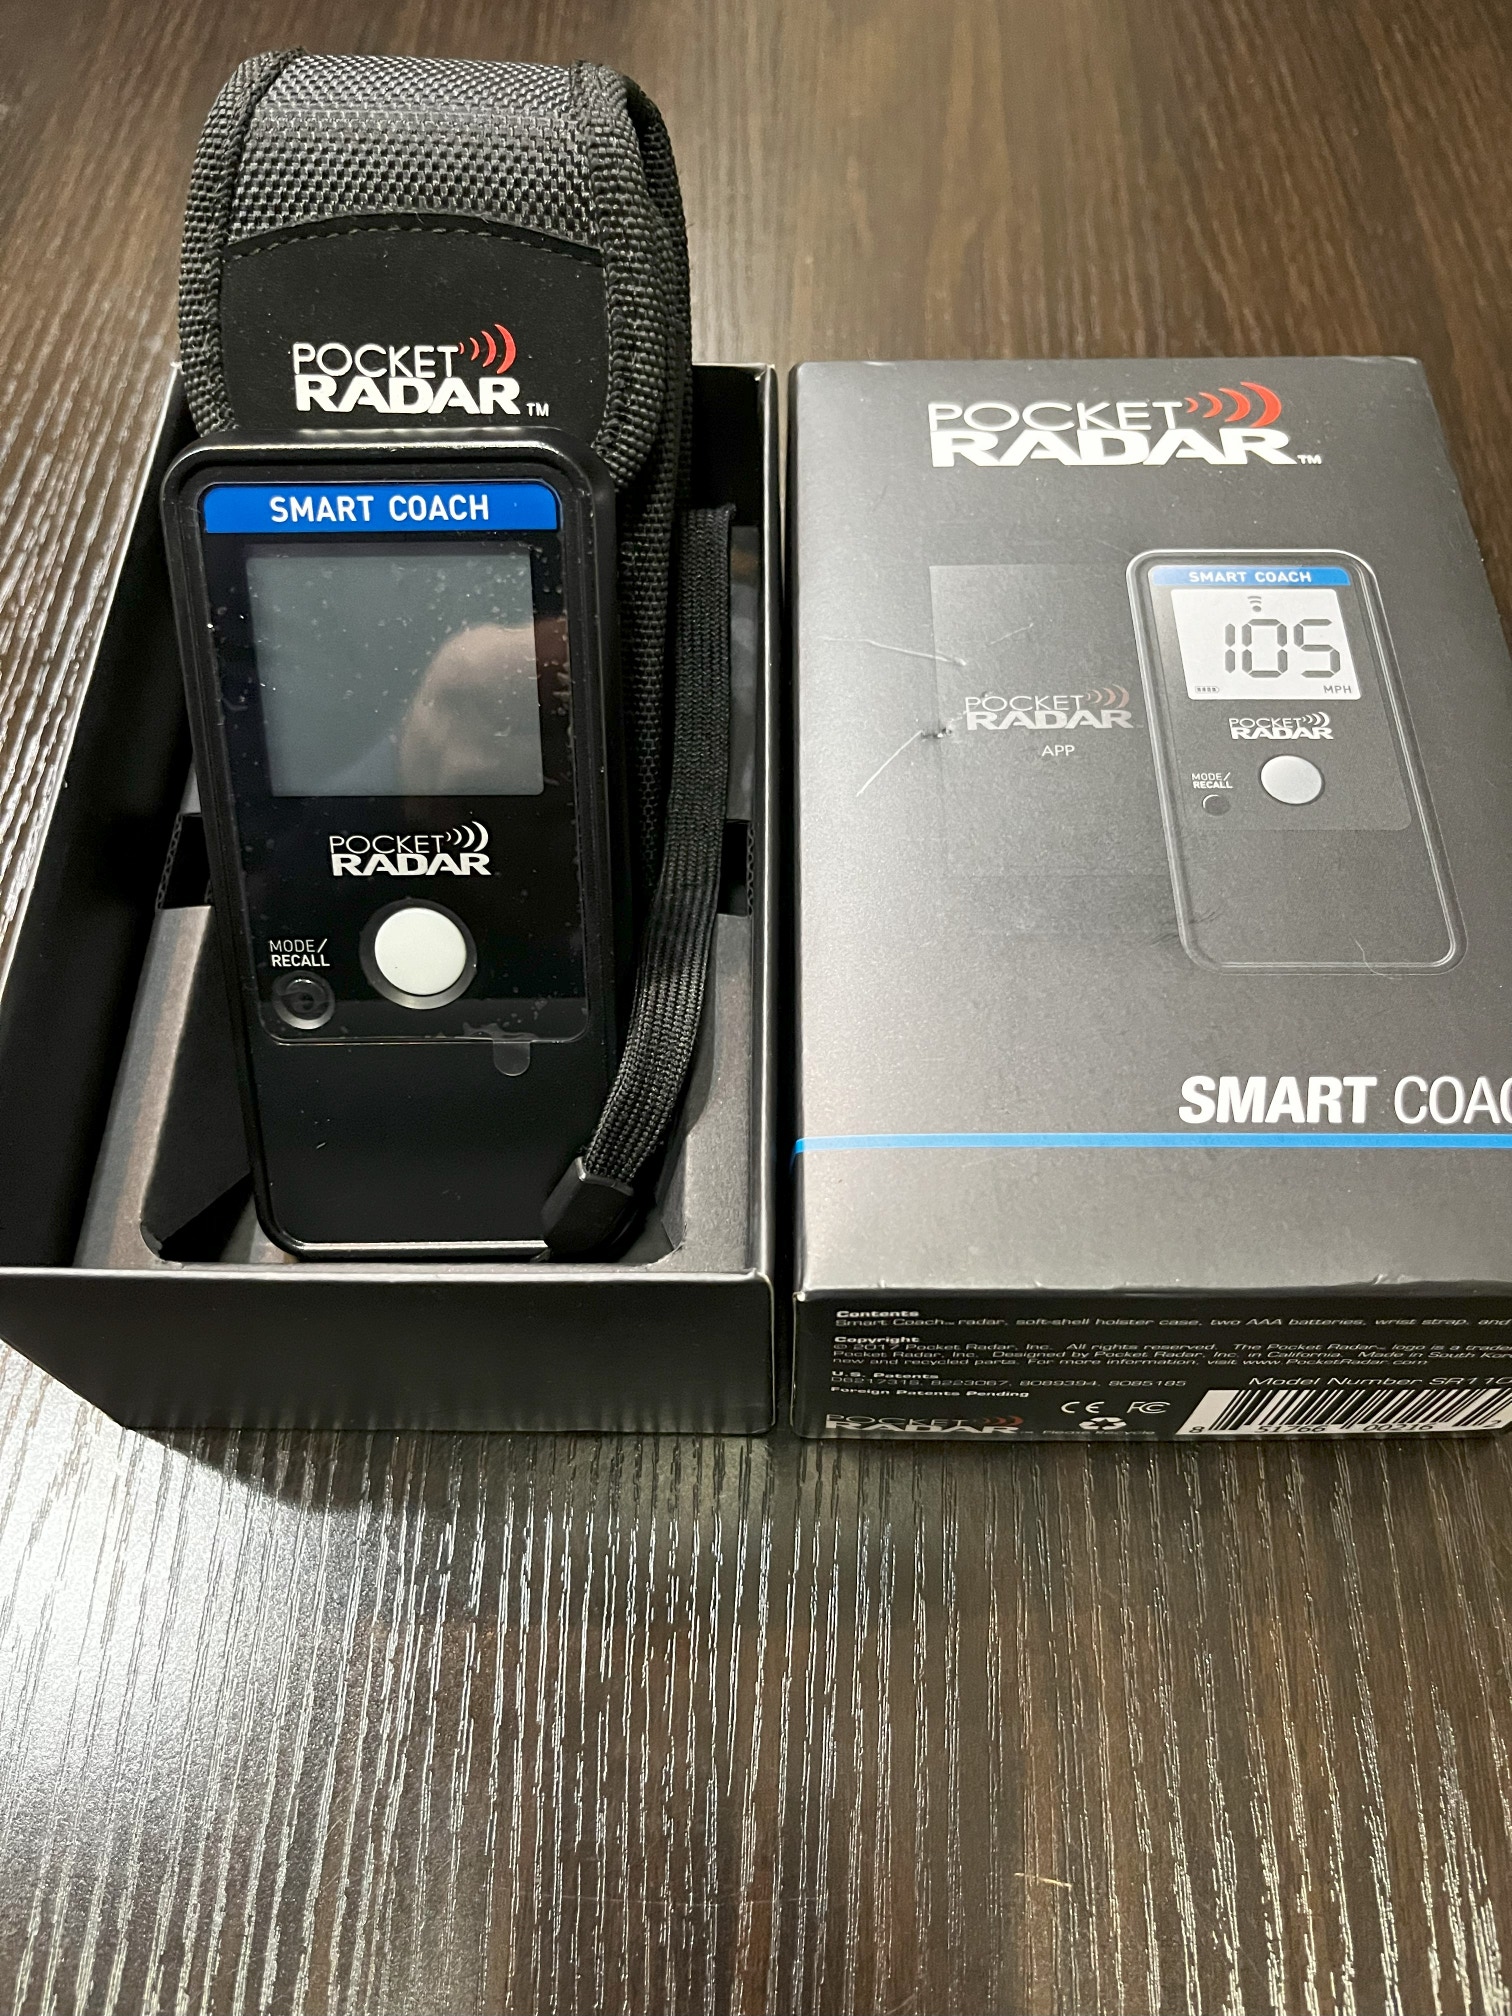 Pocket Radar Smart Coach with all accessories.